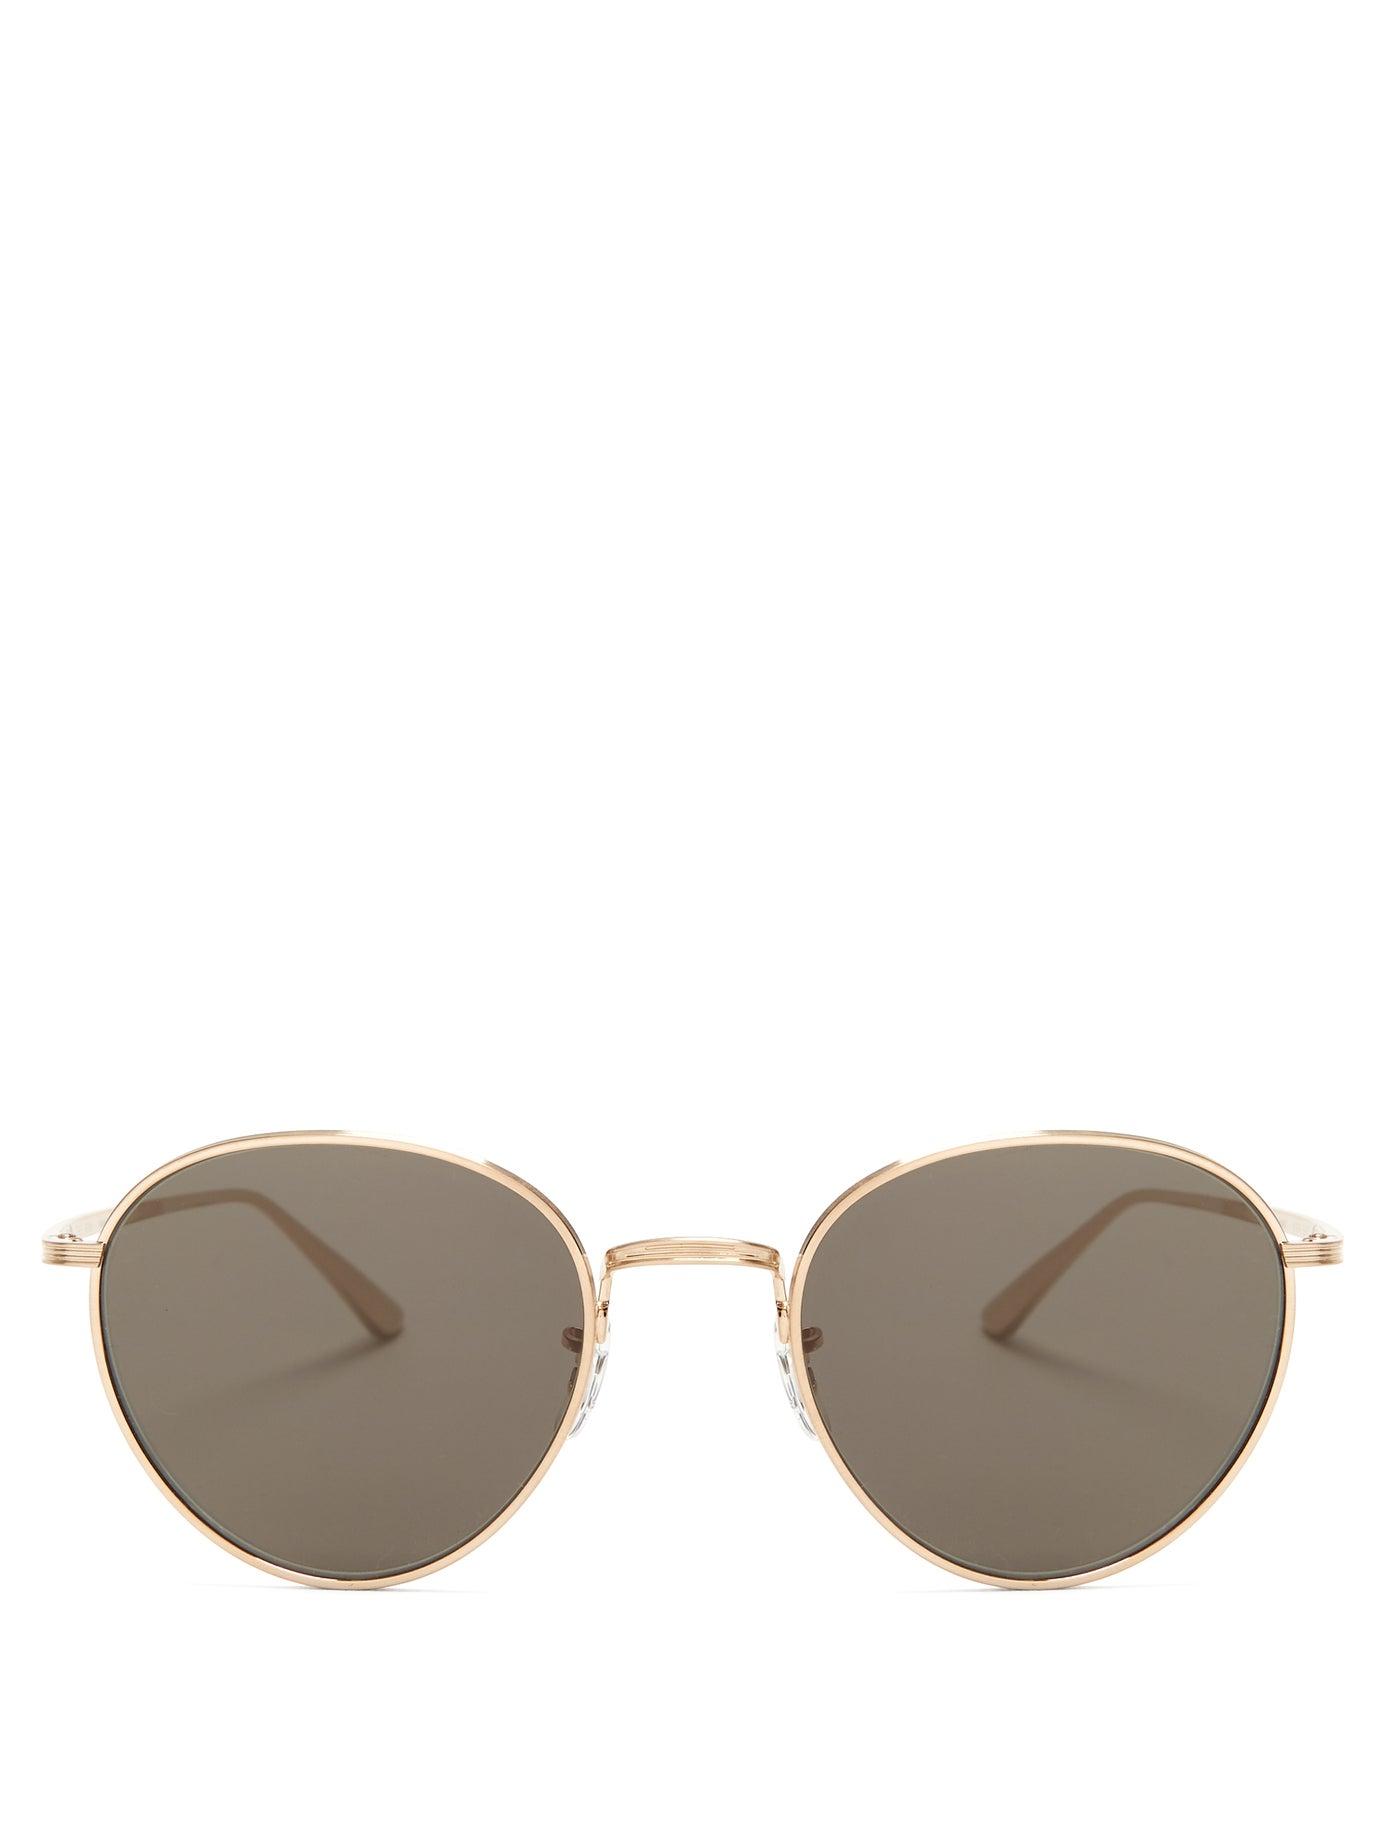 The Row X Oliver Peoples Brownstone 2 Sunglasses in Metallic | Lyst